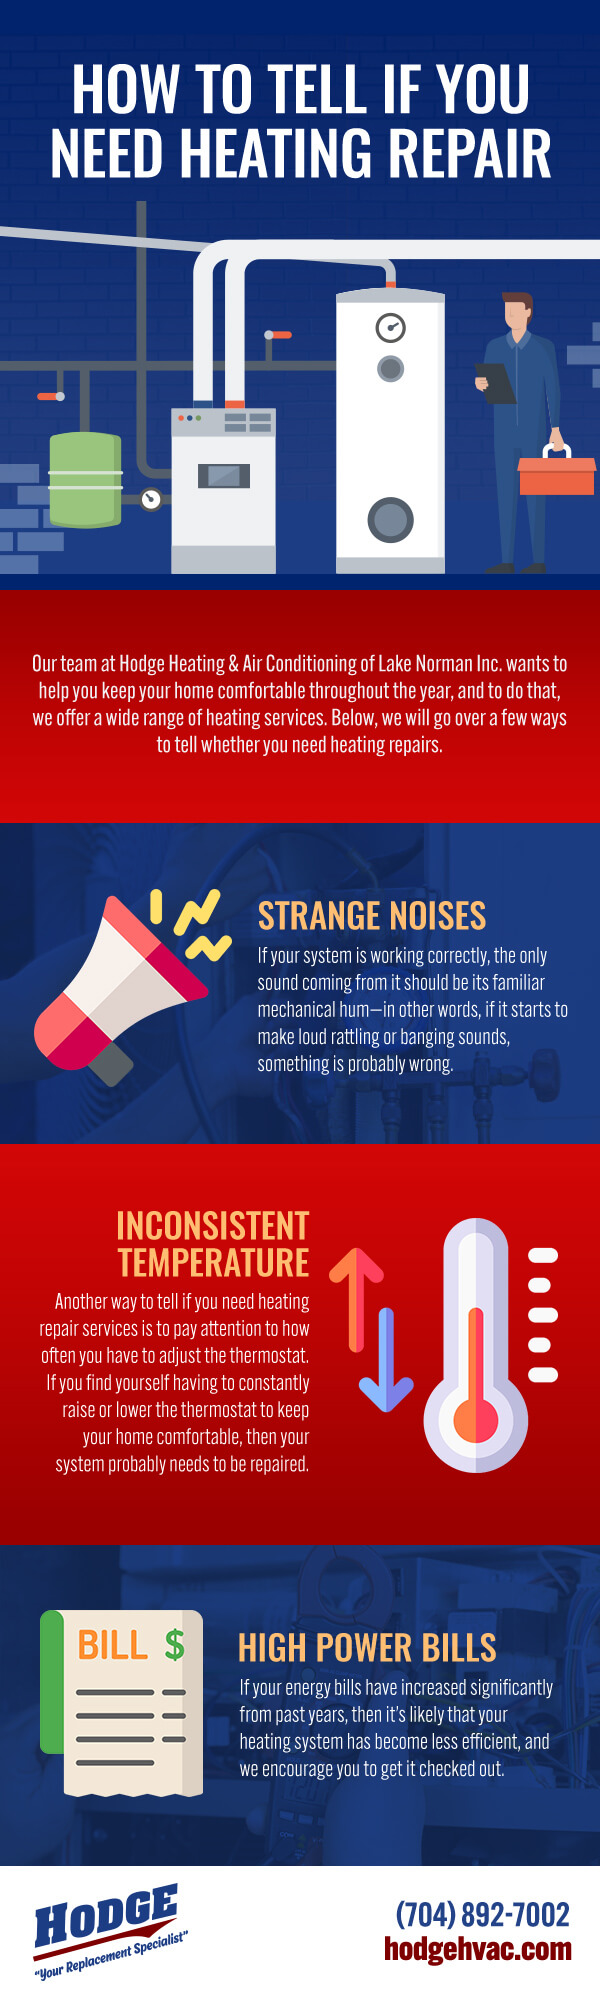 How to Tell if You Need Heating Repair